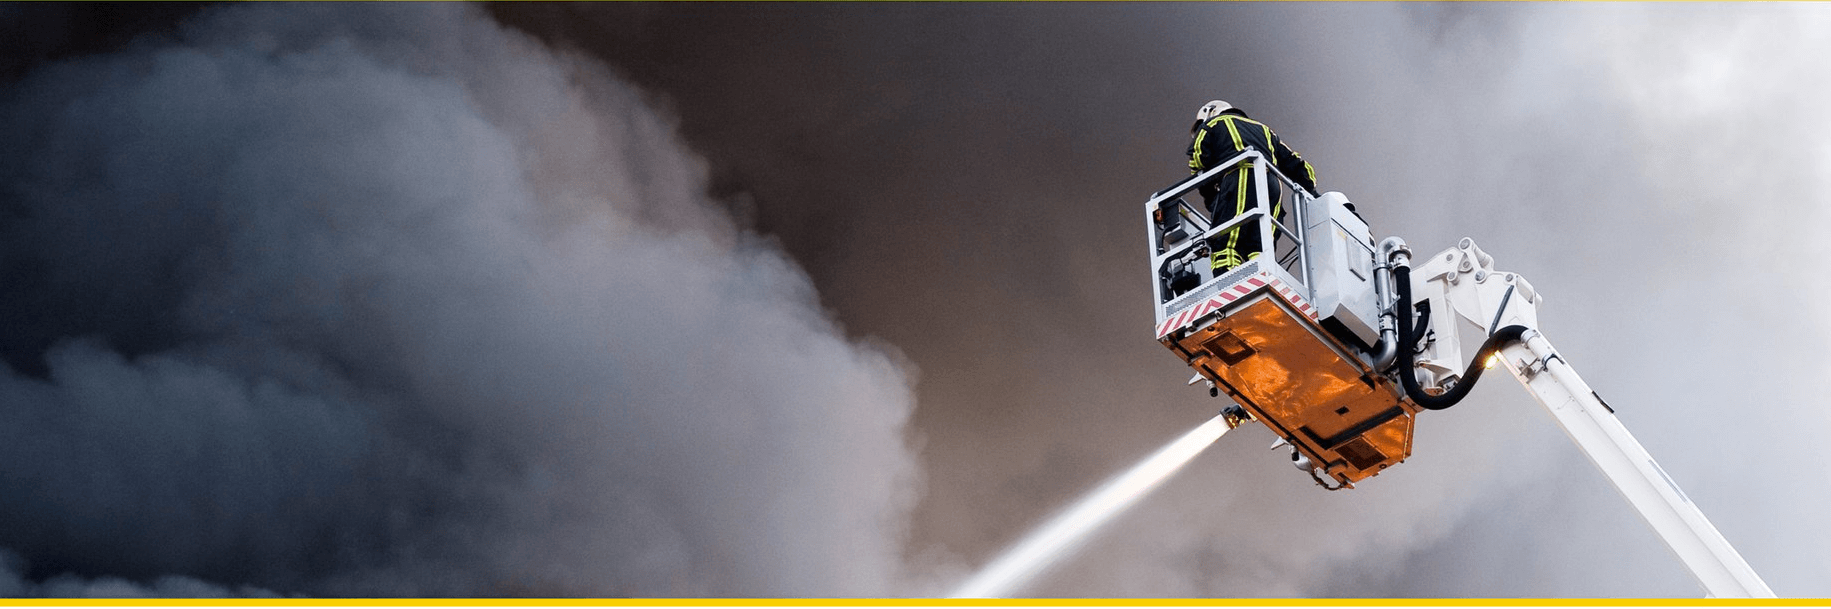 Fire departments - 5 ways of improving comms